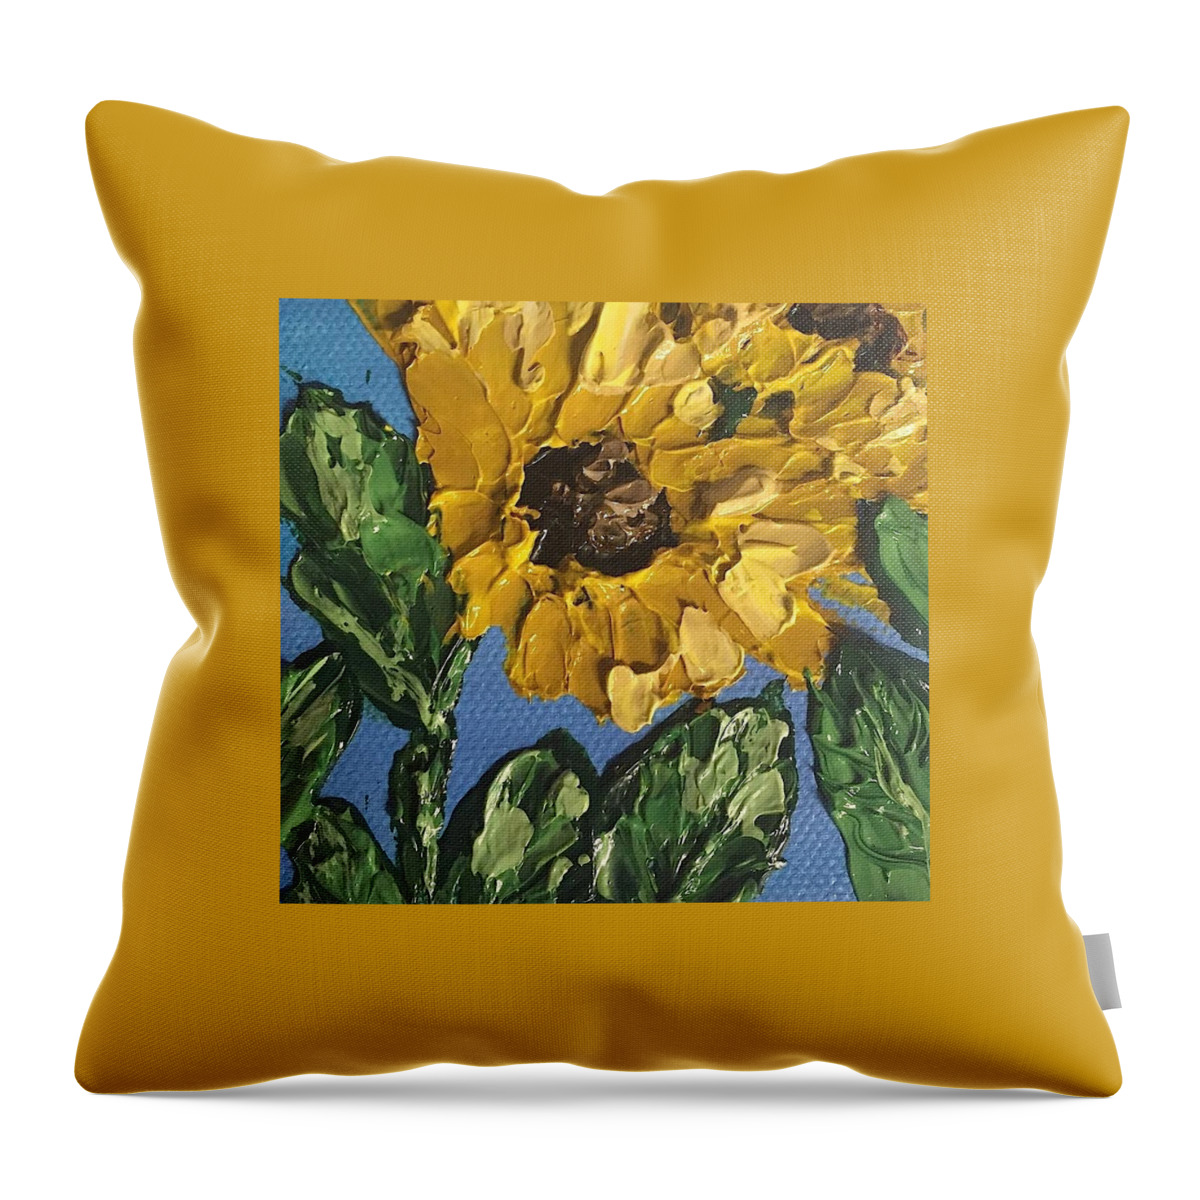 Sunflowers Throw Pillow featuring the painting Sunflowers by Melissa Torres